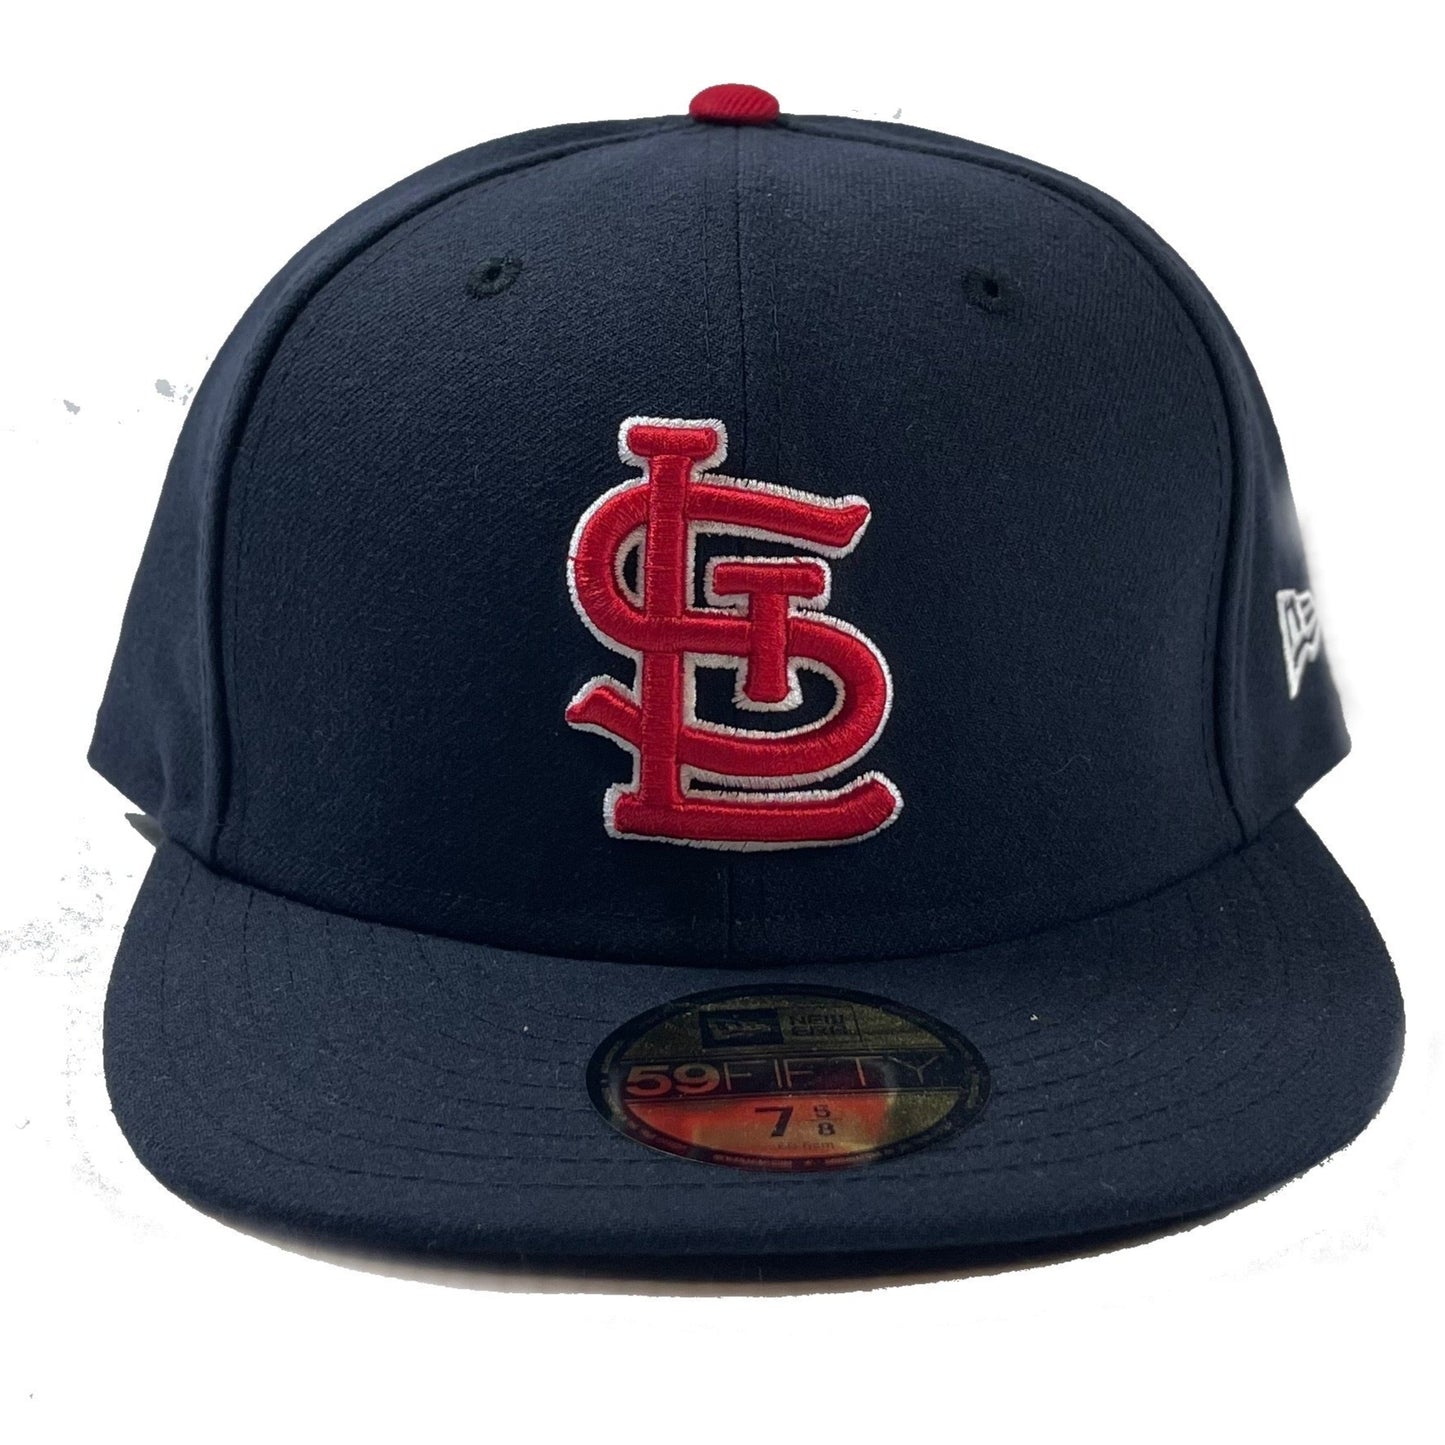 St. Louis Cardinals (Black) Fitted